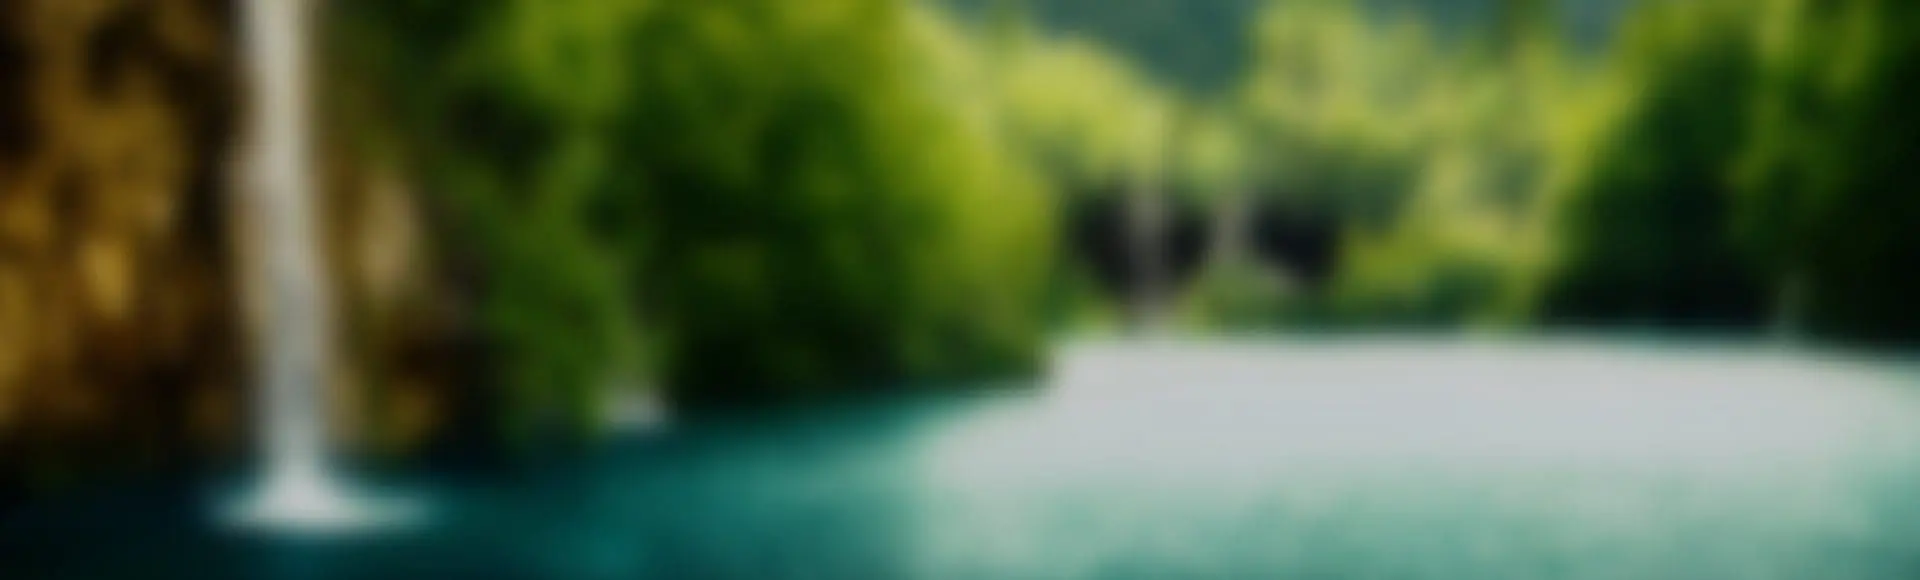 A blurry image of trees and water